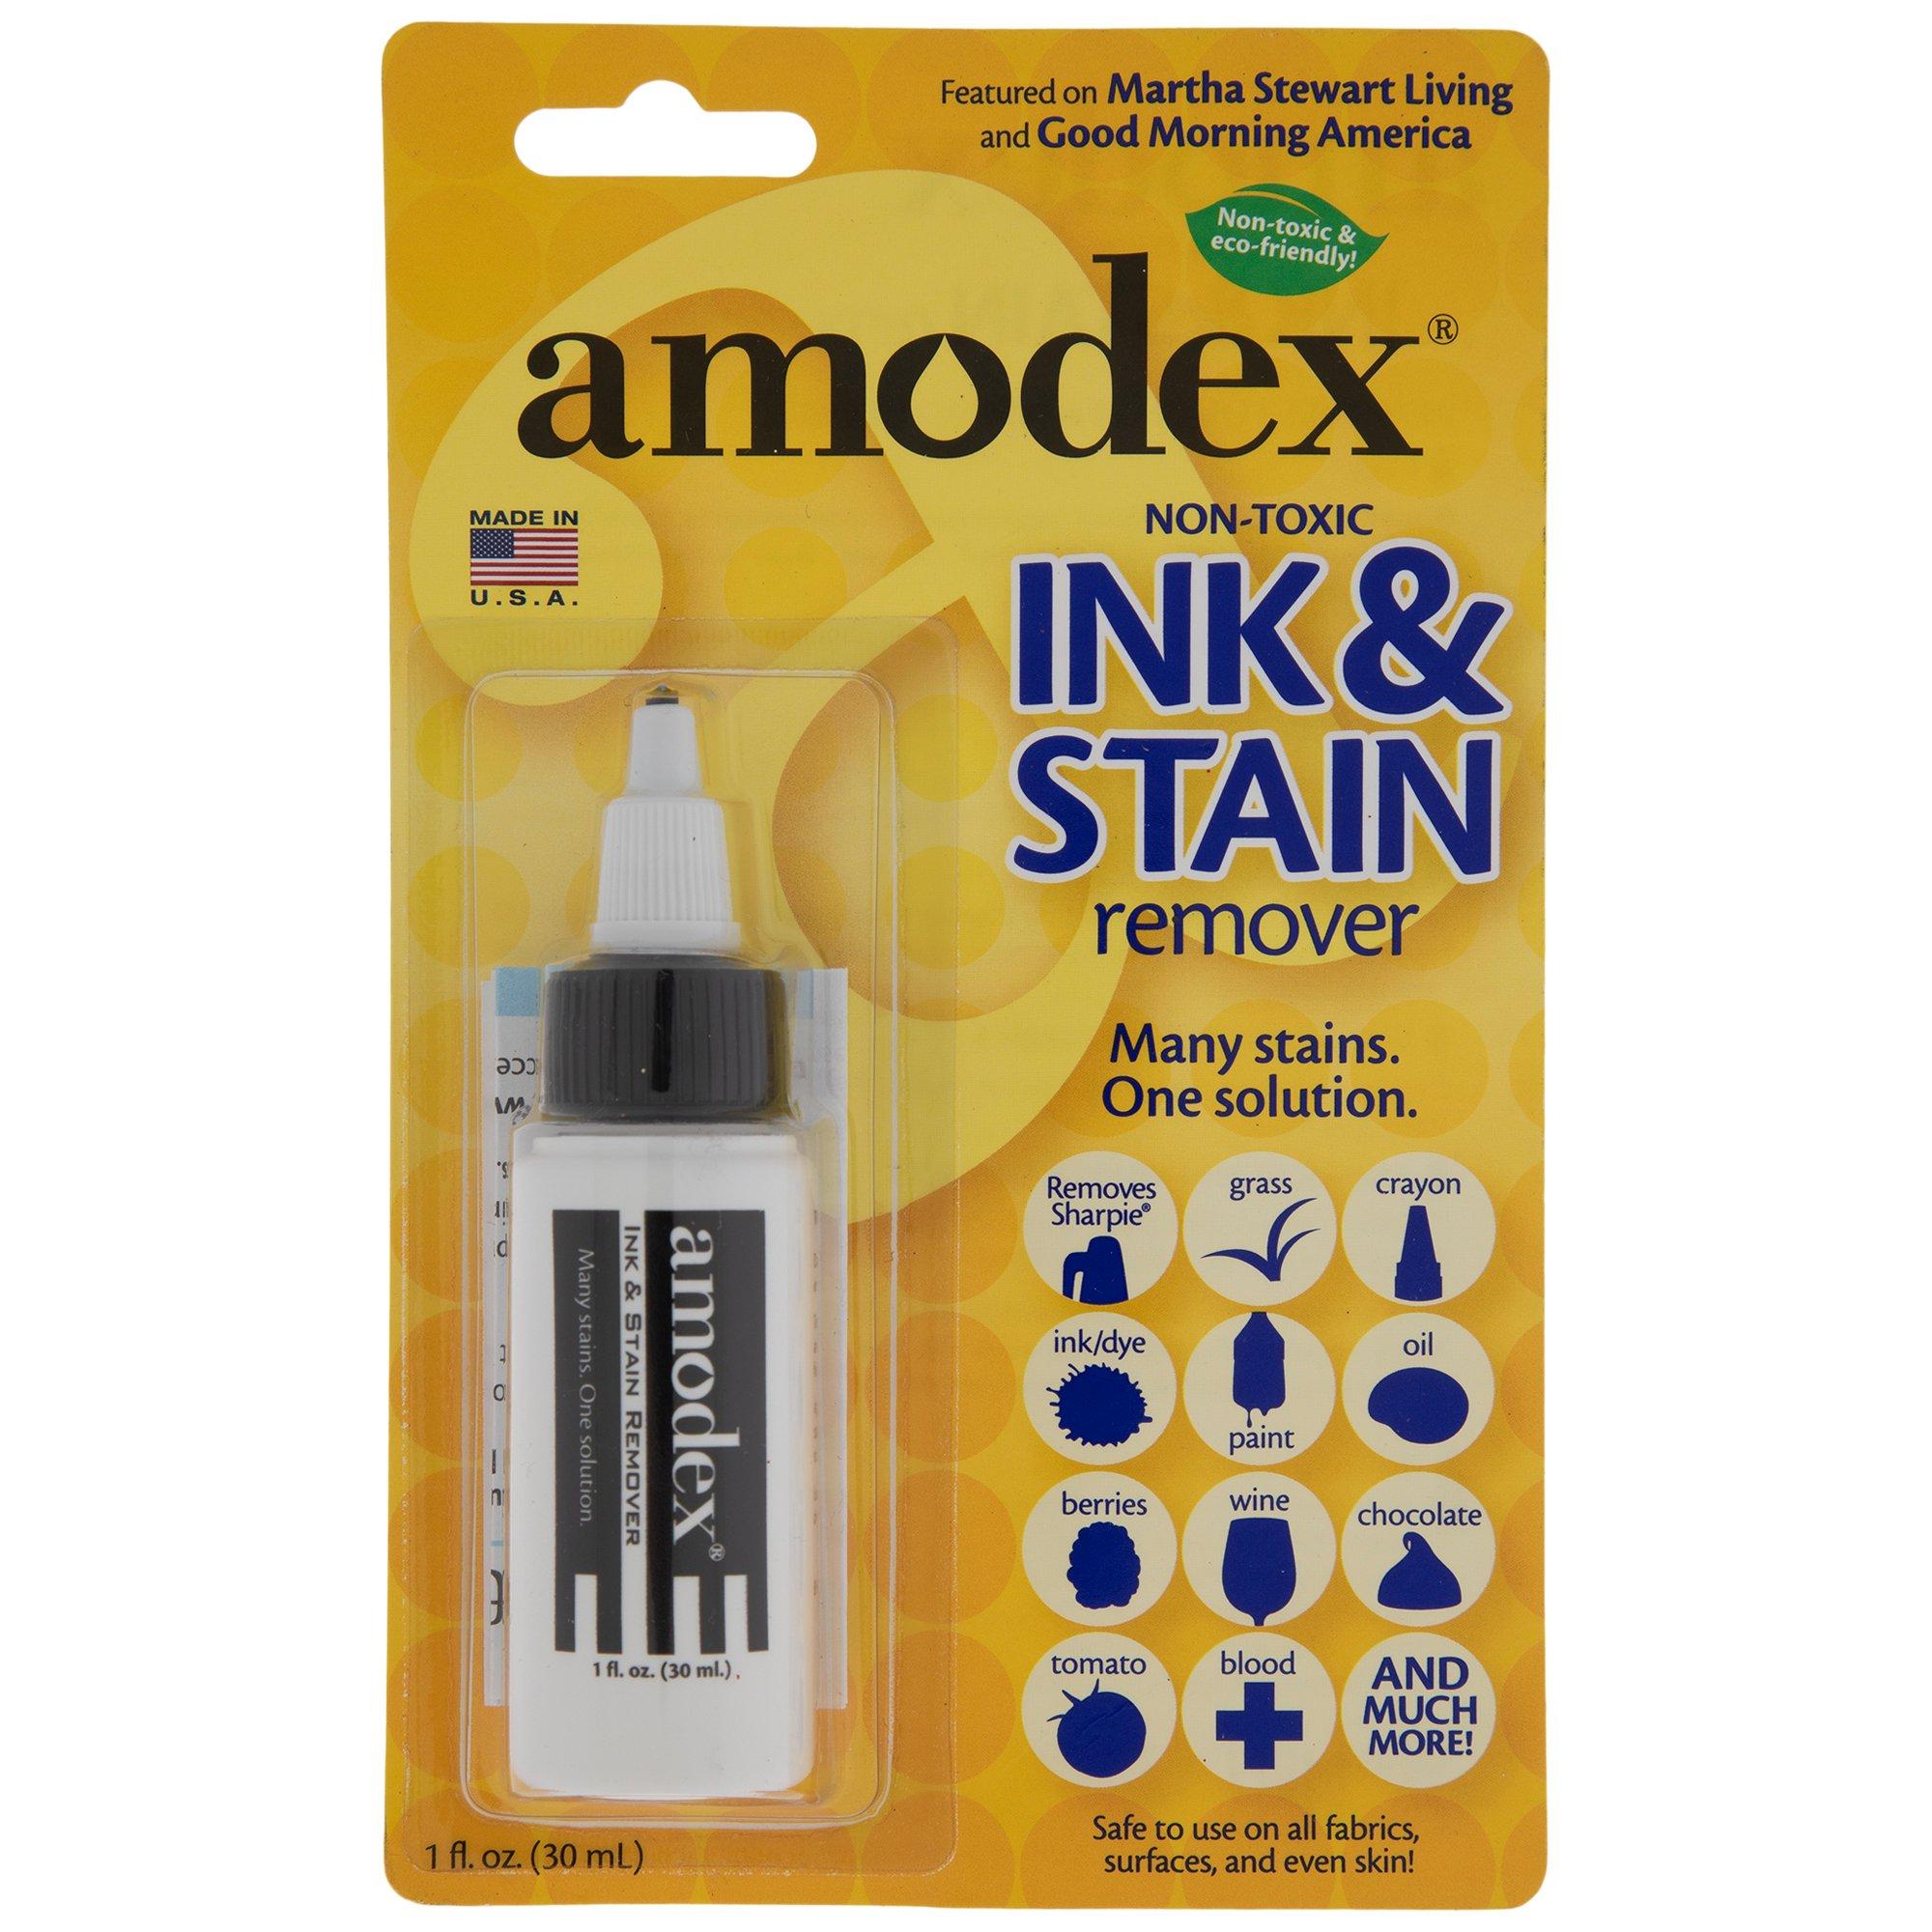  Amodex Brush for Ink & Stain Remover, Use with Stain Remover to  Clean Marker, Ink, Crayon, Pen, Makeup from Furniture, Skin, Clothing,  Fabric, Leather : Health & Household